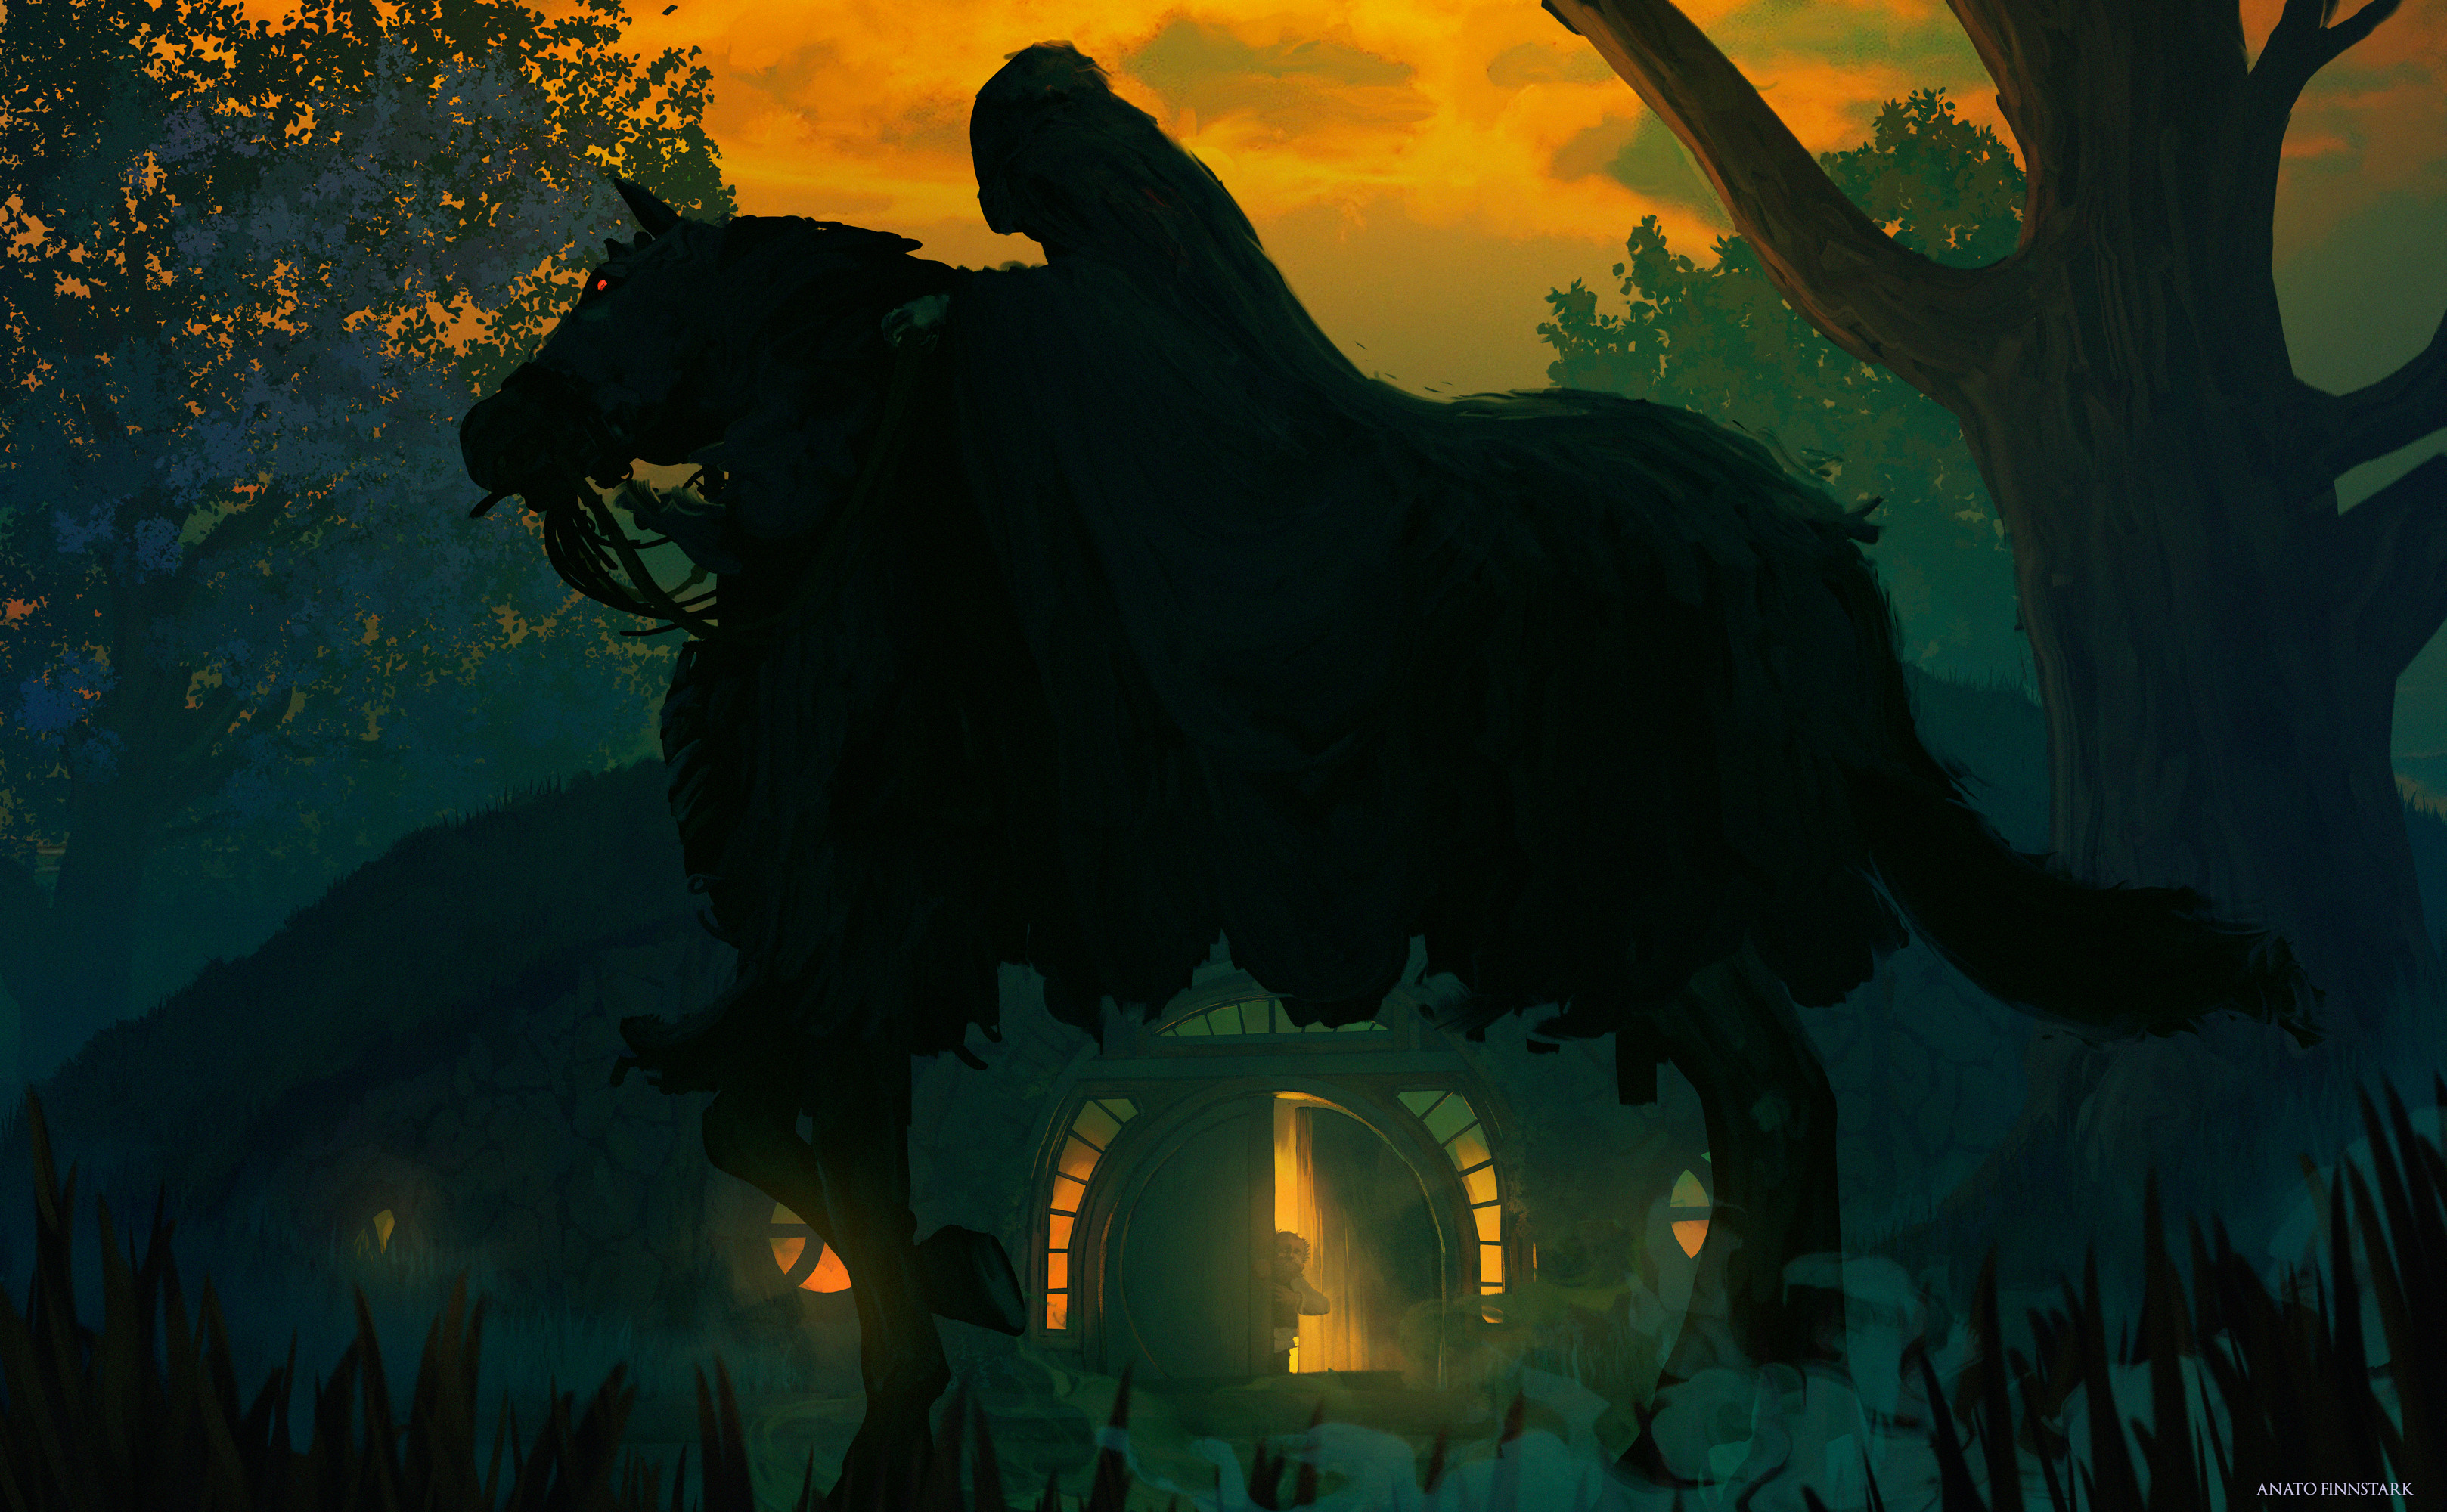 Fantasy Art Artwork The Lord Of The Rings Nazgul 3236x2000